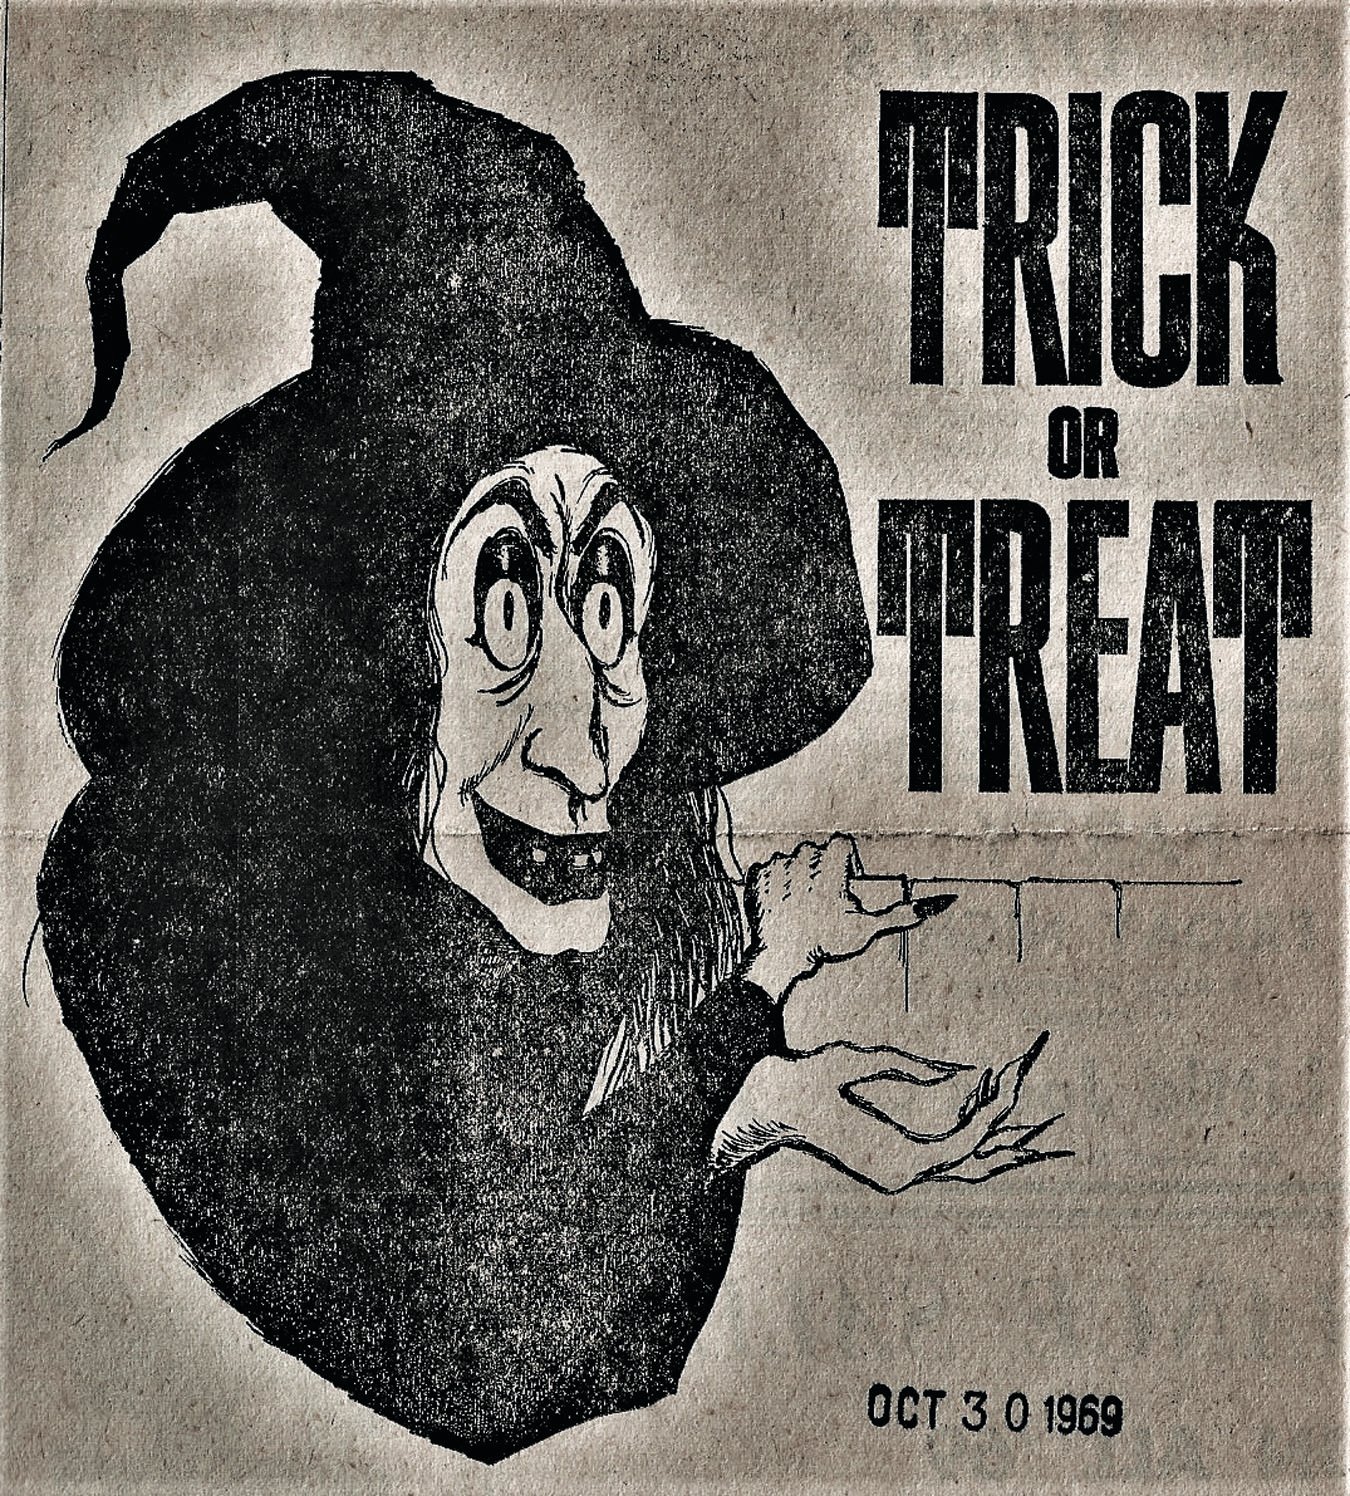 This is the decoration on the Halloween Trick or Treat bags provided in October 1969 by the Daily Intelligencer.